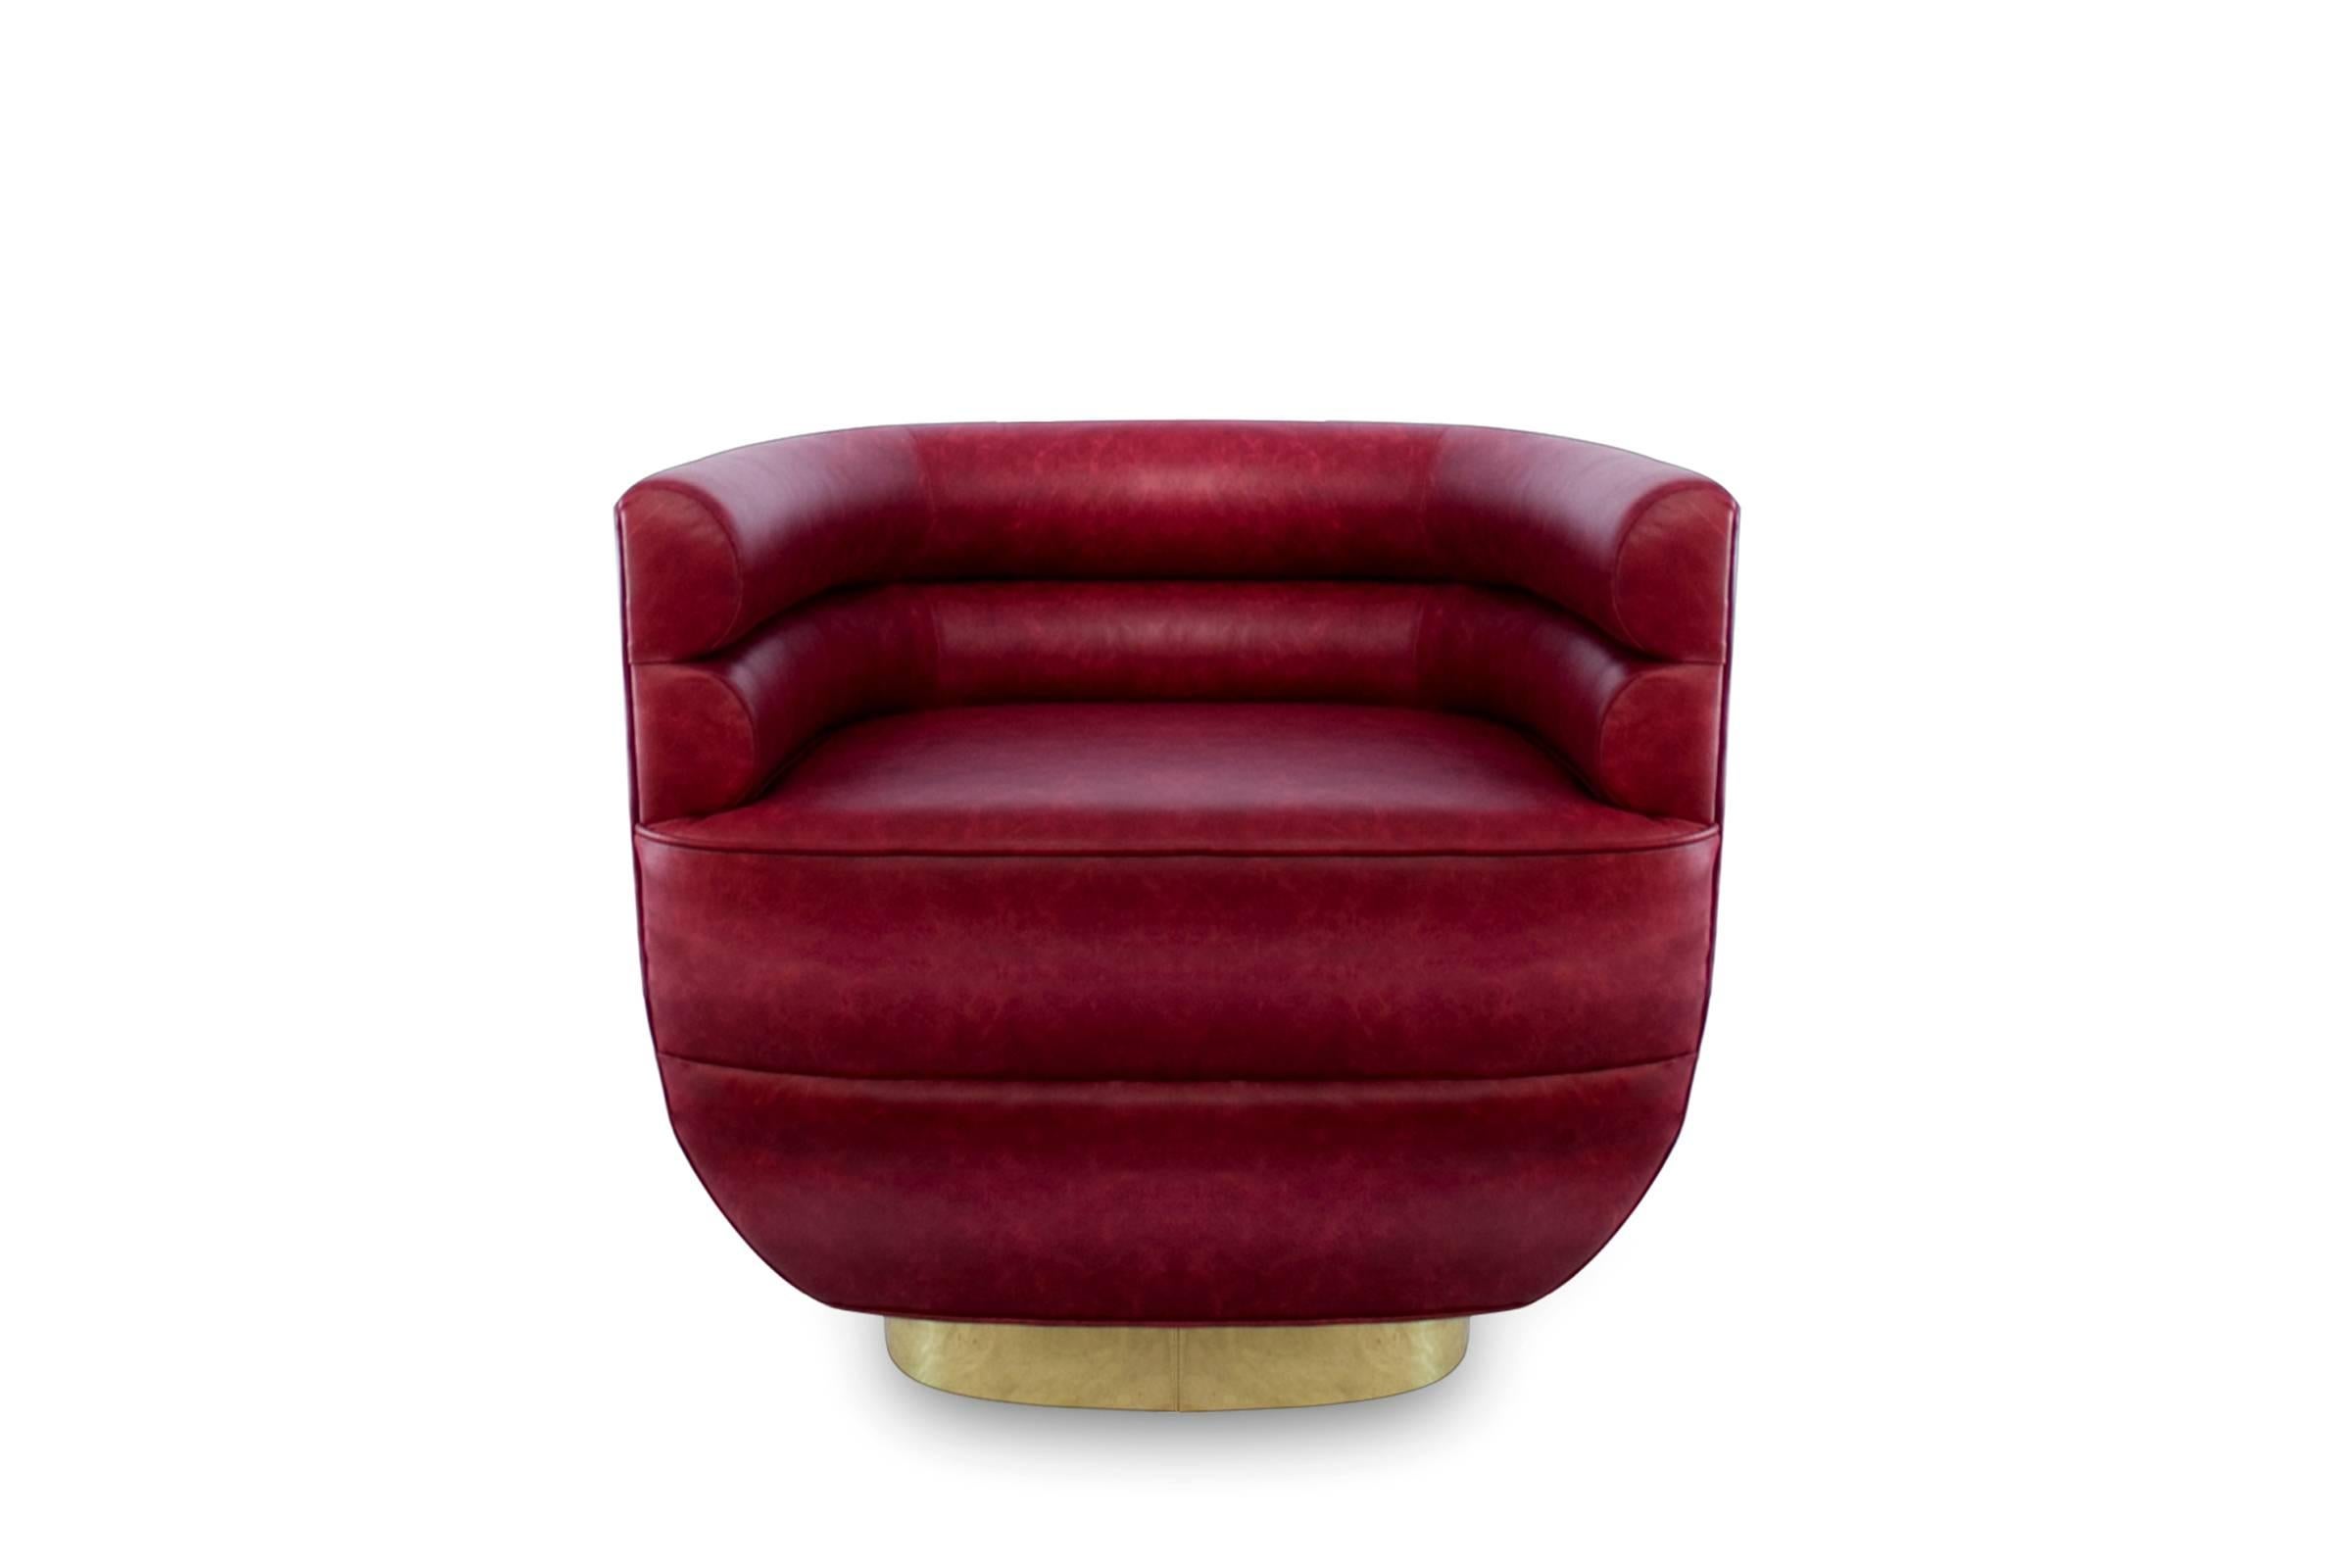 Armchair color lounge with solid wood
structure, upholstered and covered with 
genuine red leather and on swivel polished 
brass base. Also available in green, purple
or brown leather.
